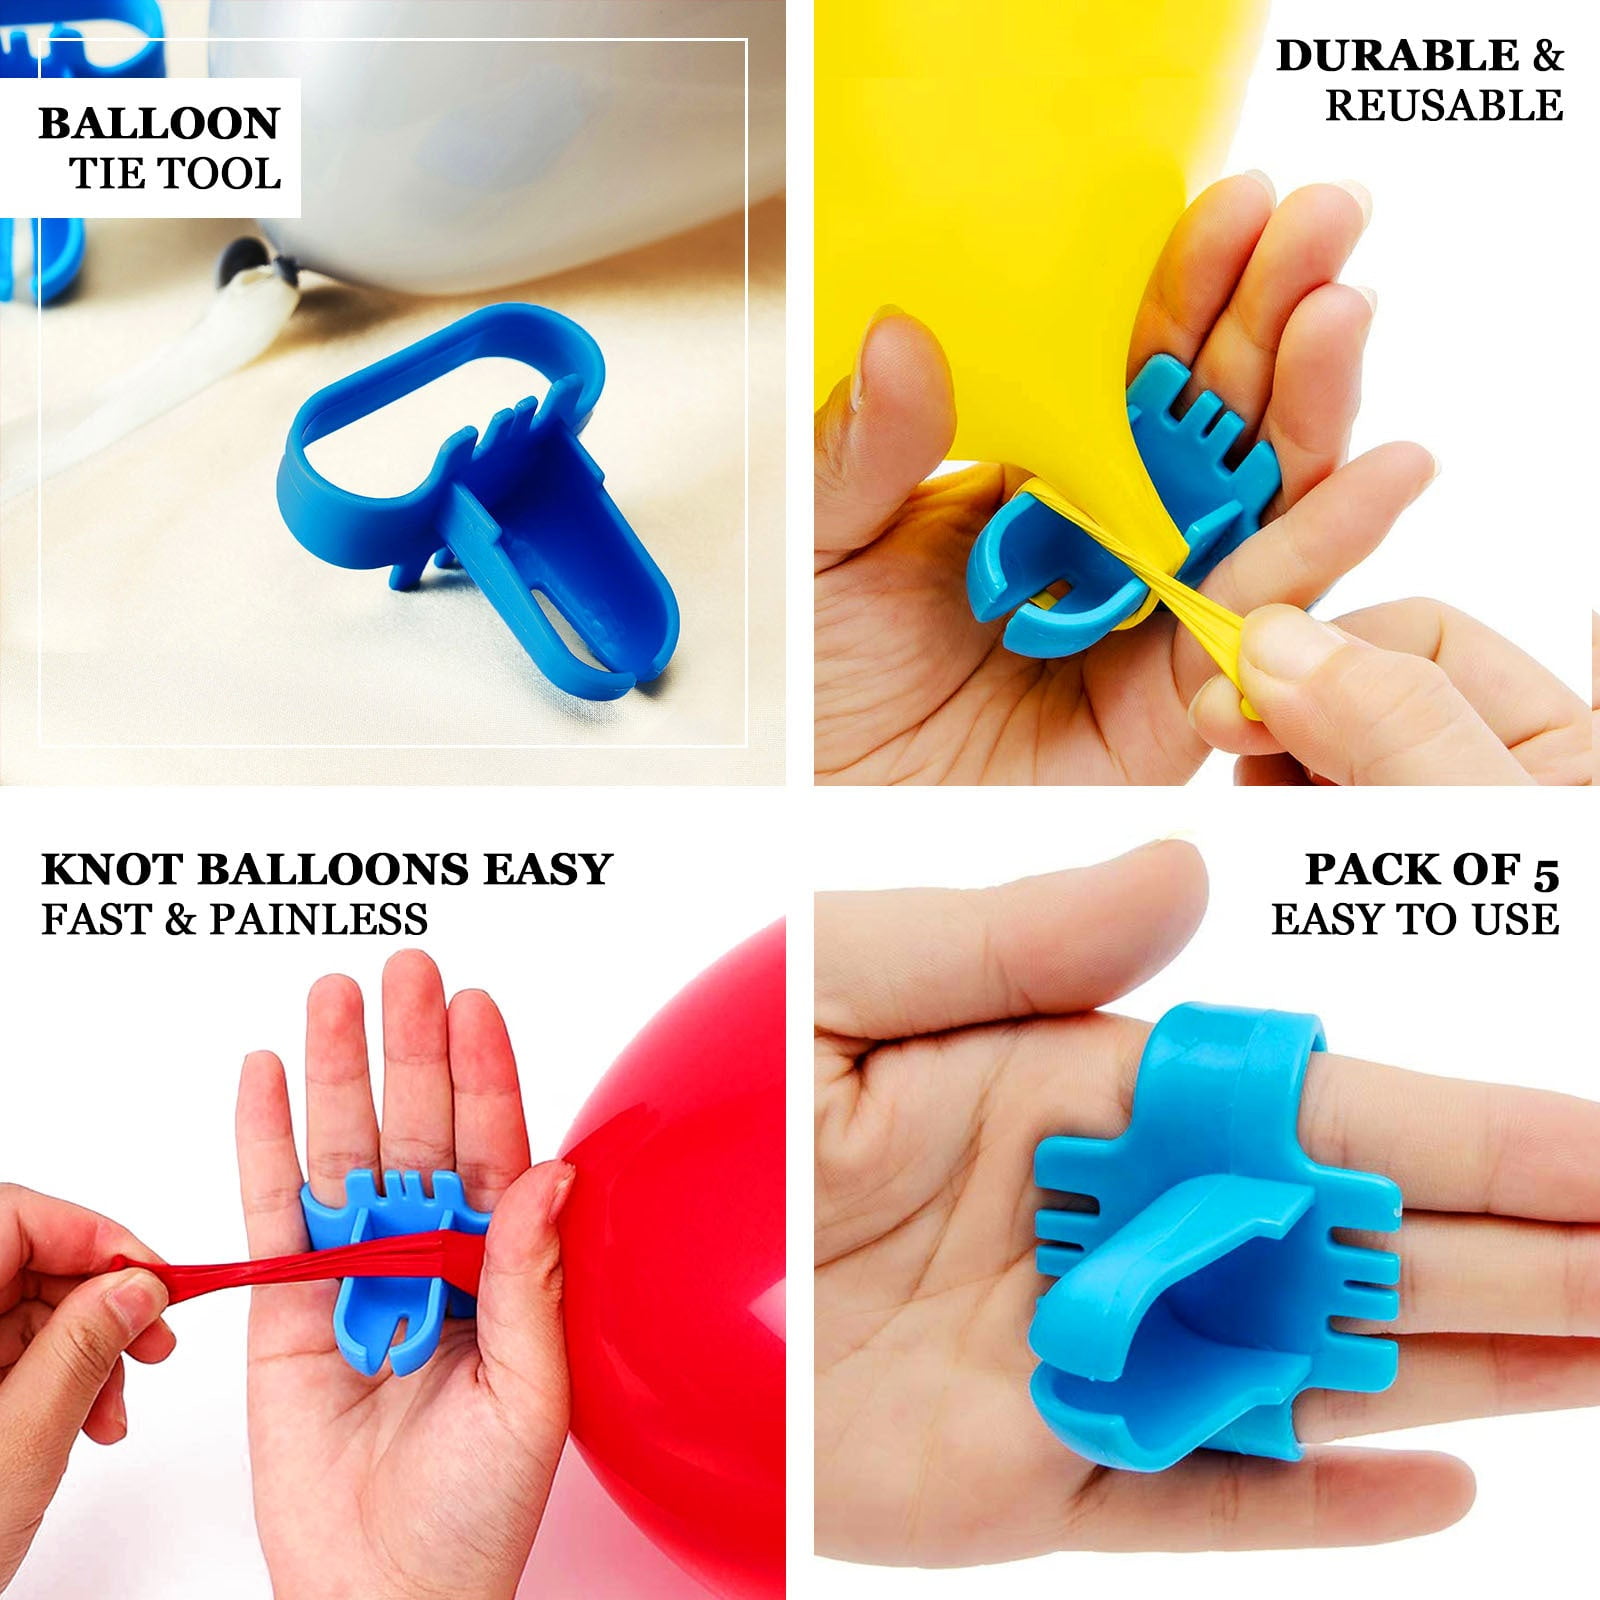 Efavormart Pack of 5 Blue Balloon Tie Tool for Party Balloons for Knotting  Faster and Save Time, Party Supplies, Balloon Column Arch 